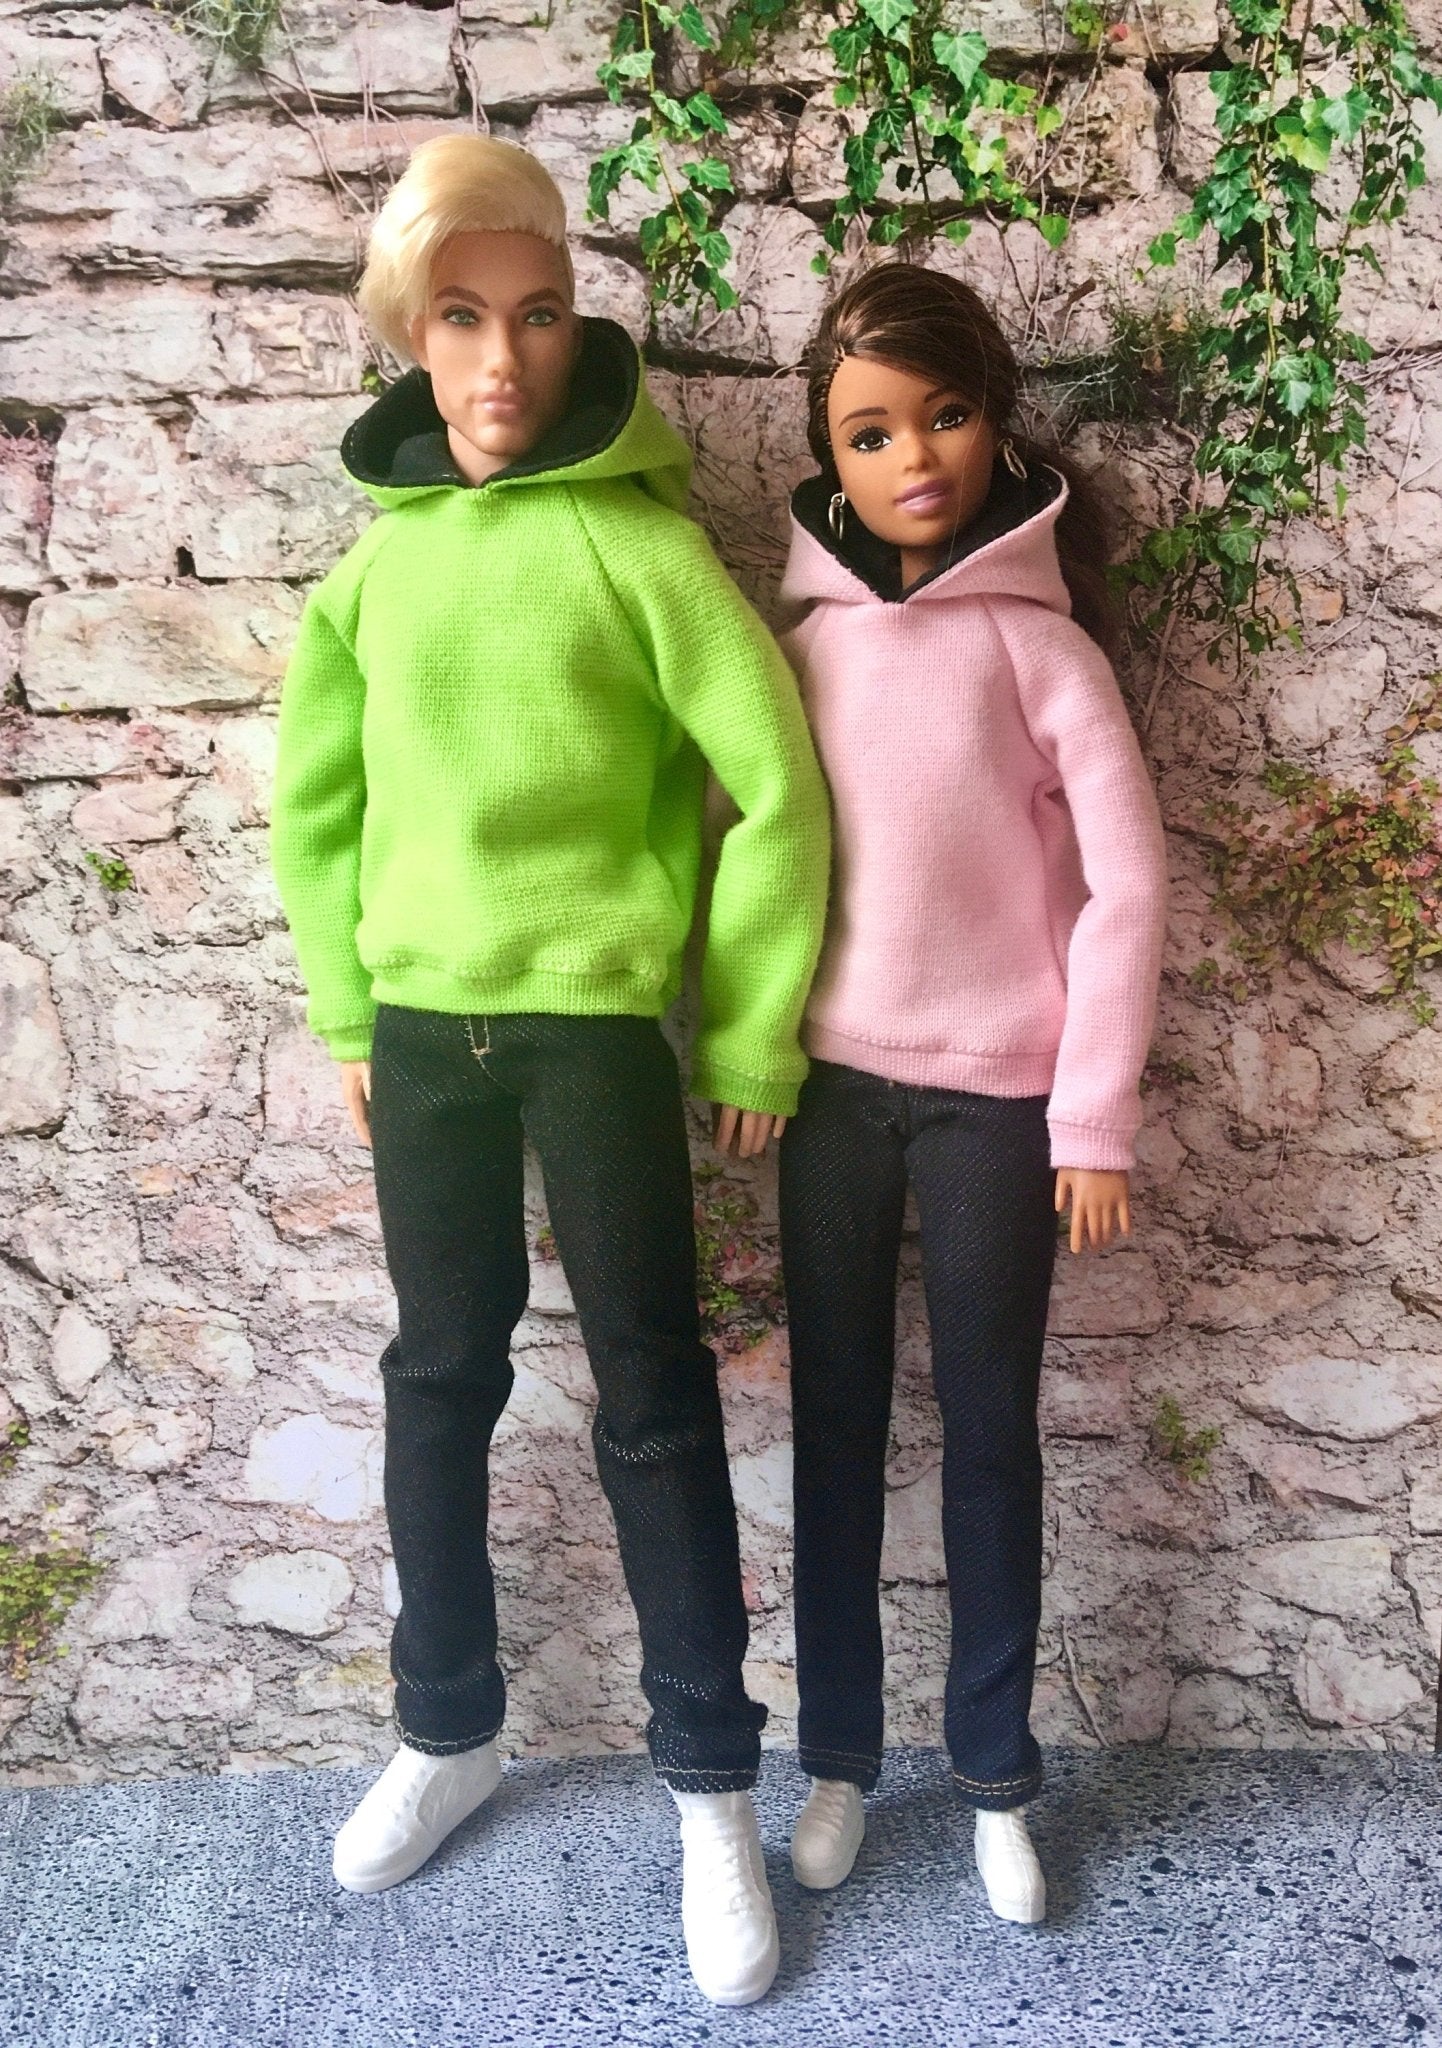 Basic Hoodie for Ken Doll | Ken Doll Hoodie - many colors - Bouutique.com